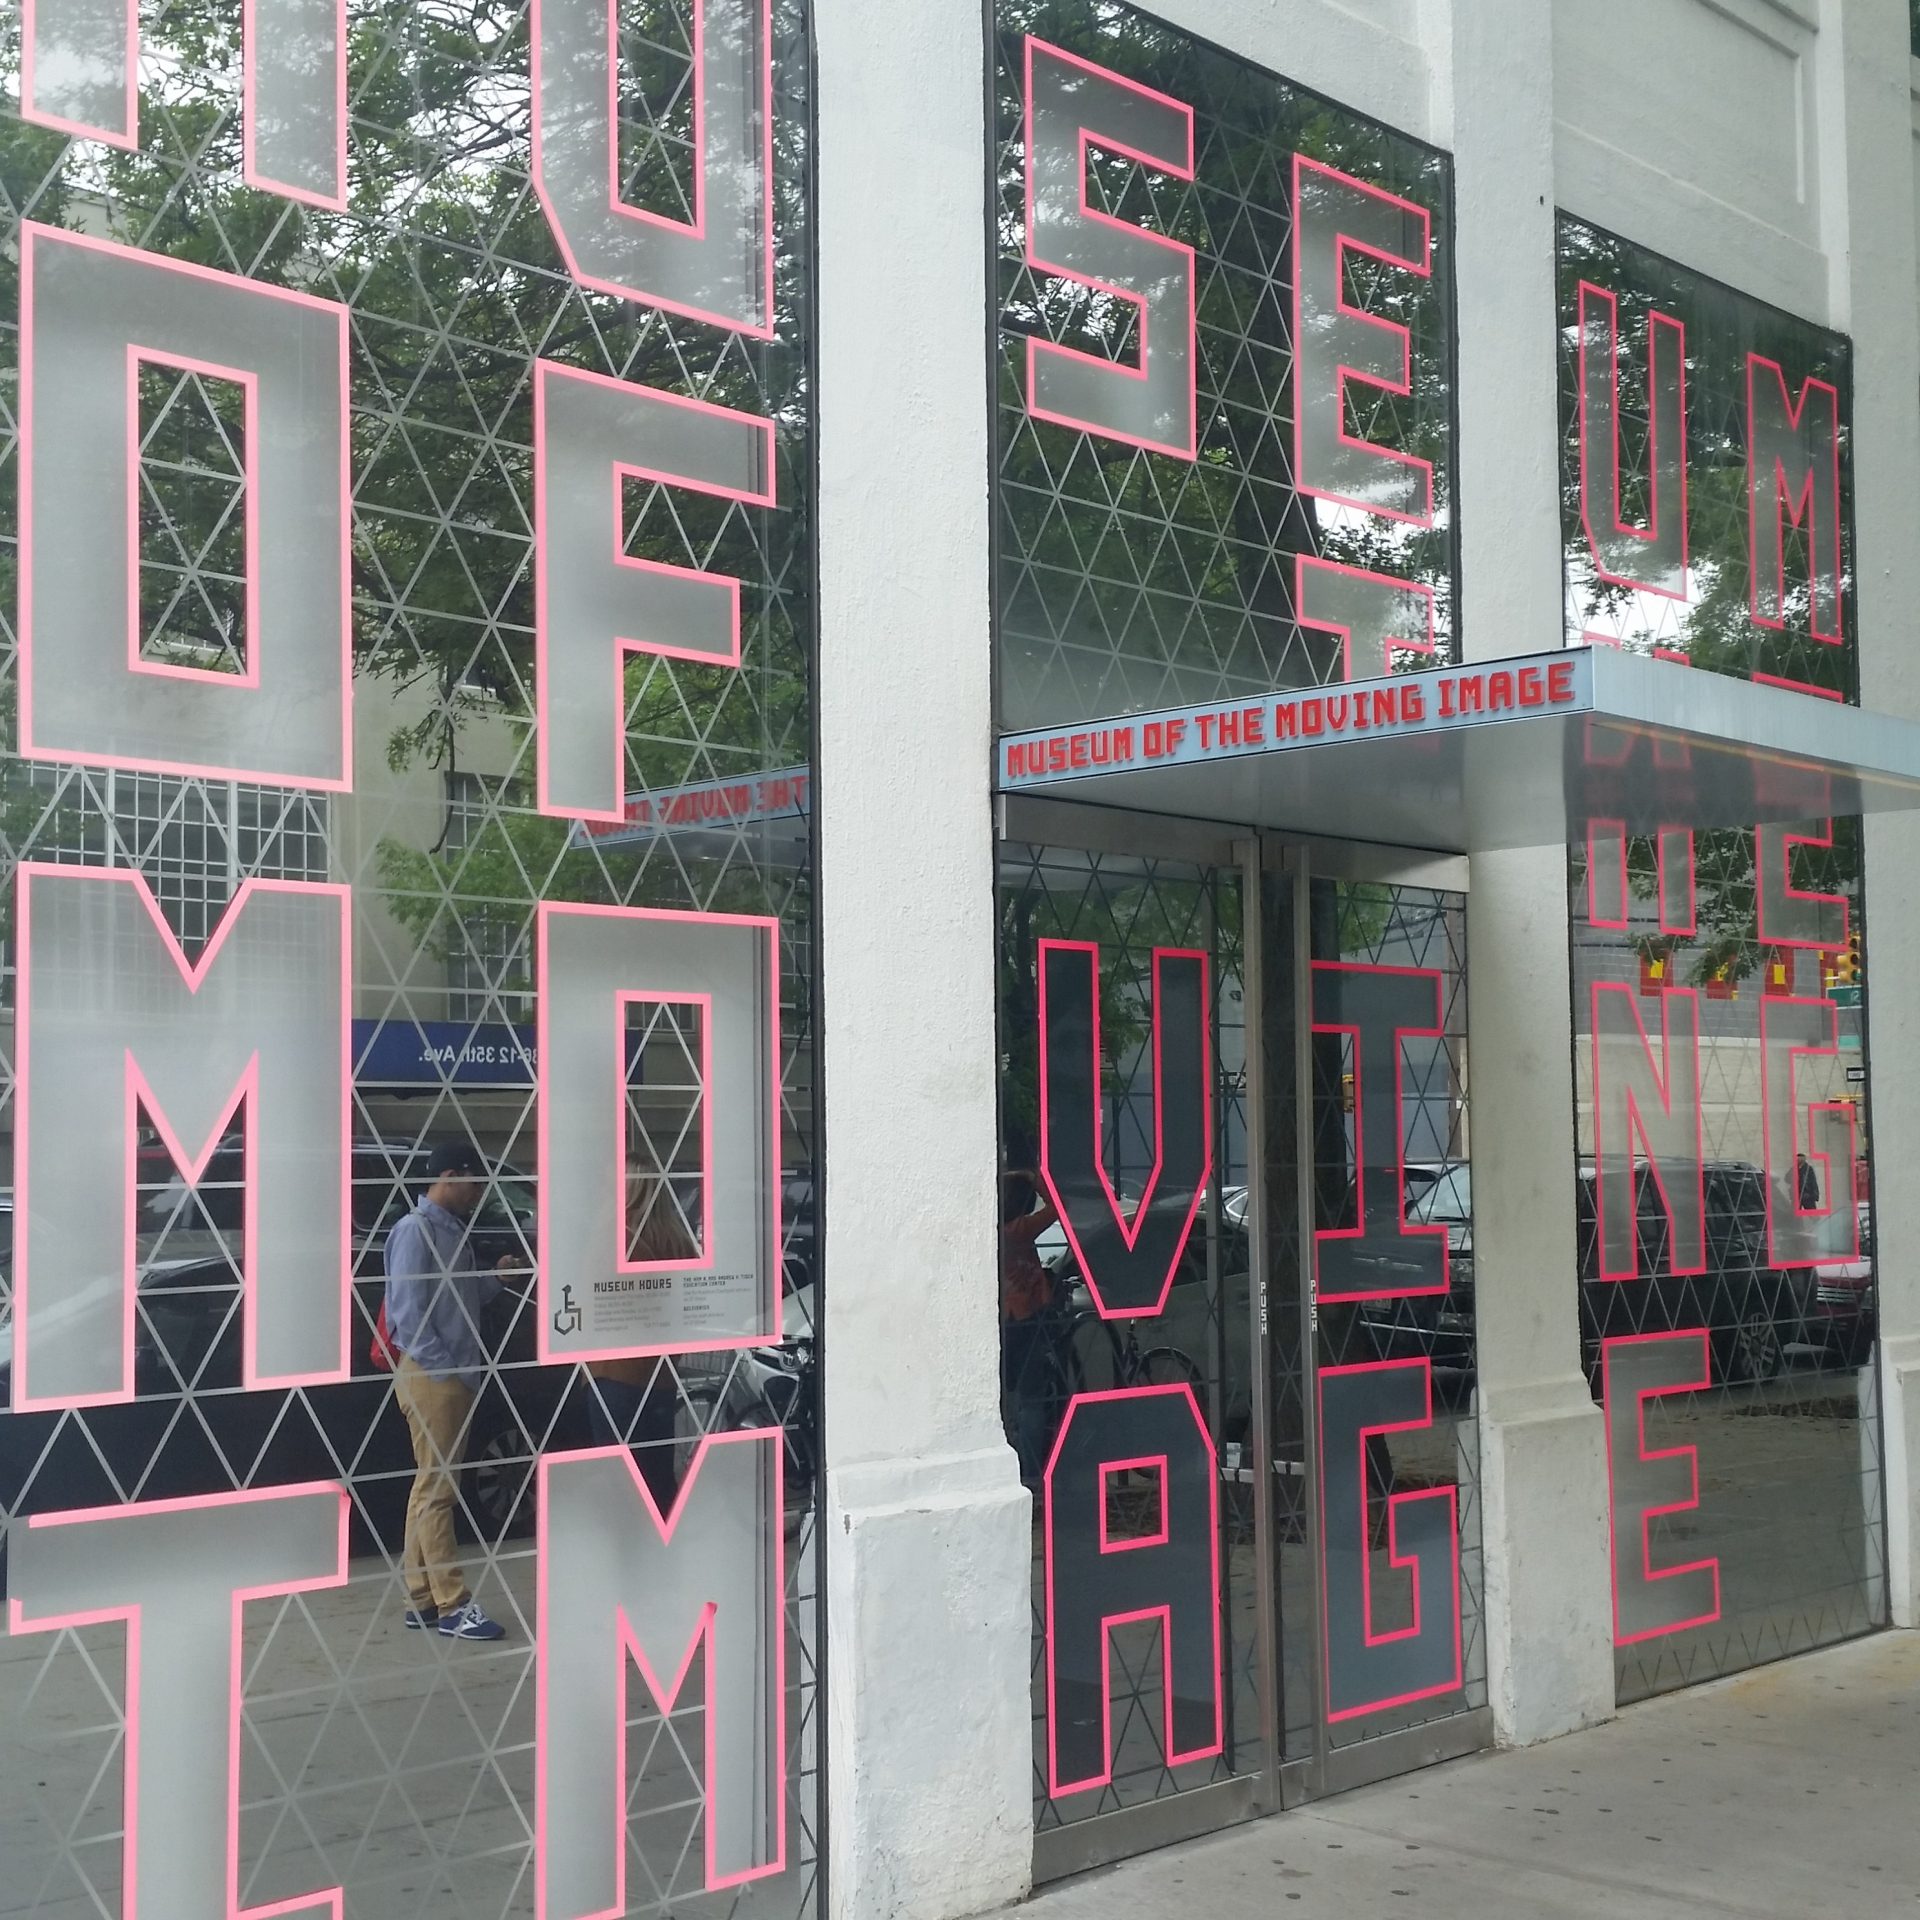 review of the museum of the moving image